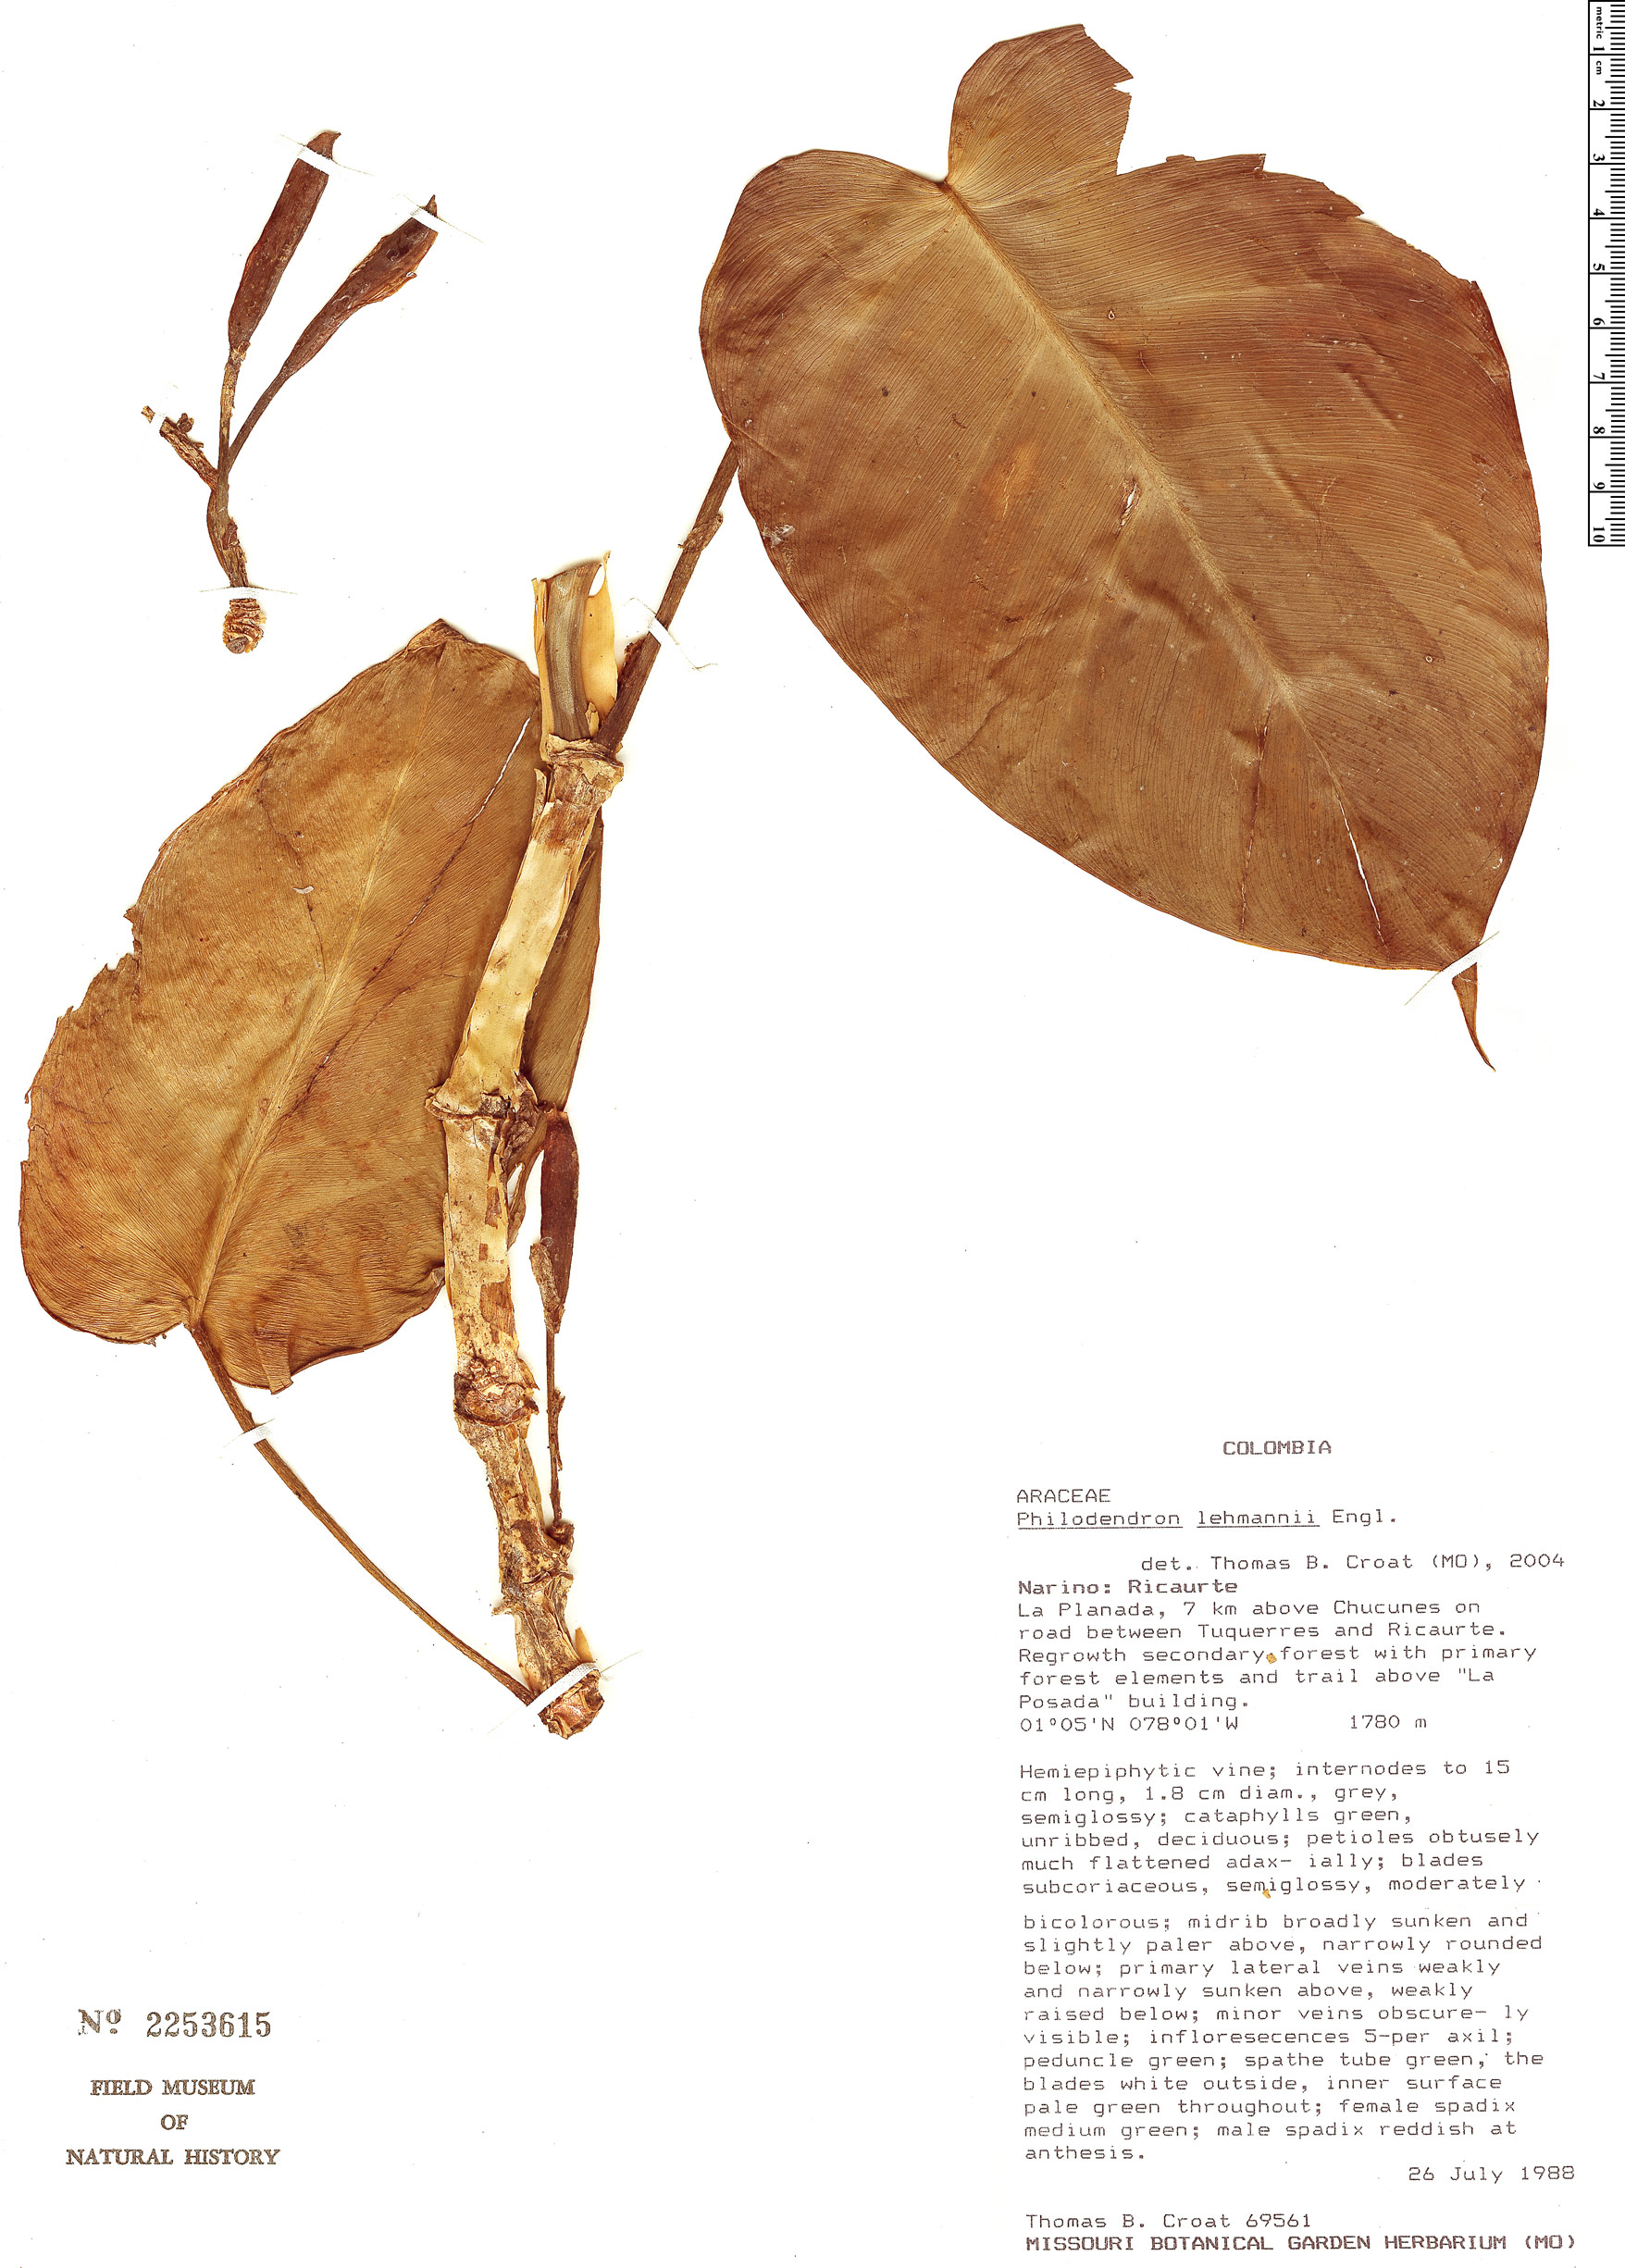 Philodendron lehmannii image